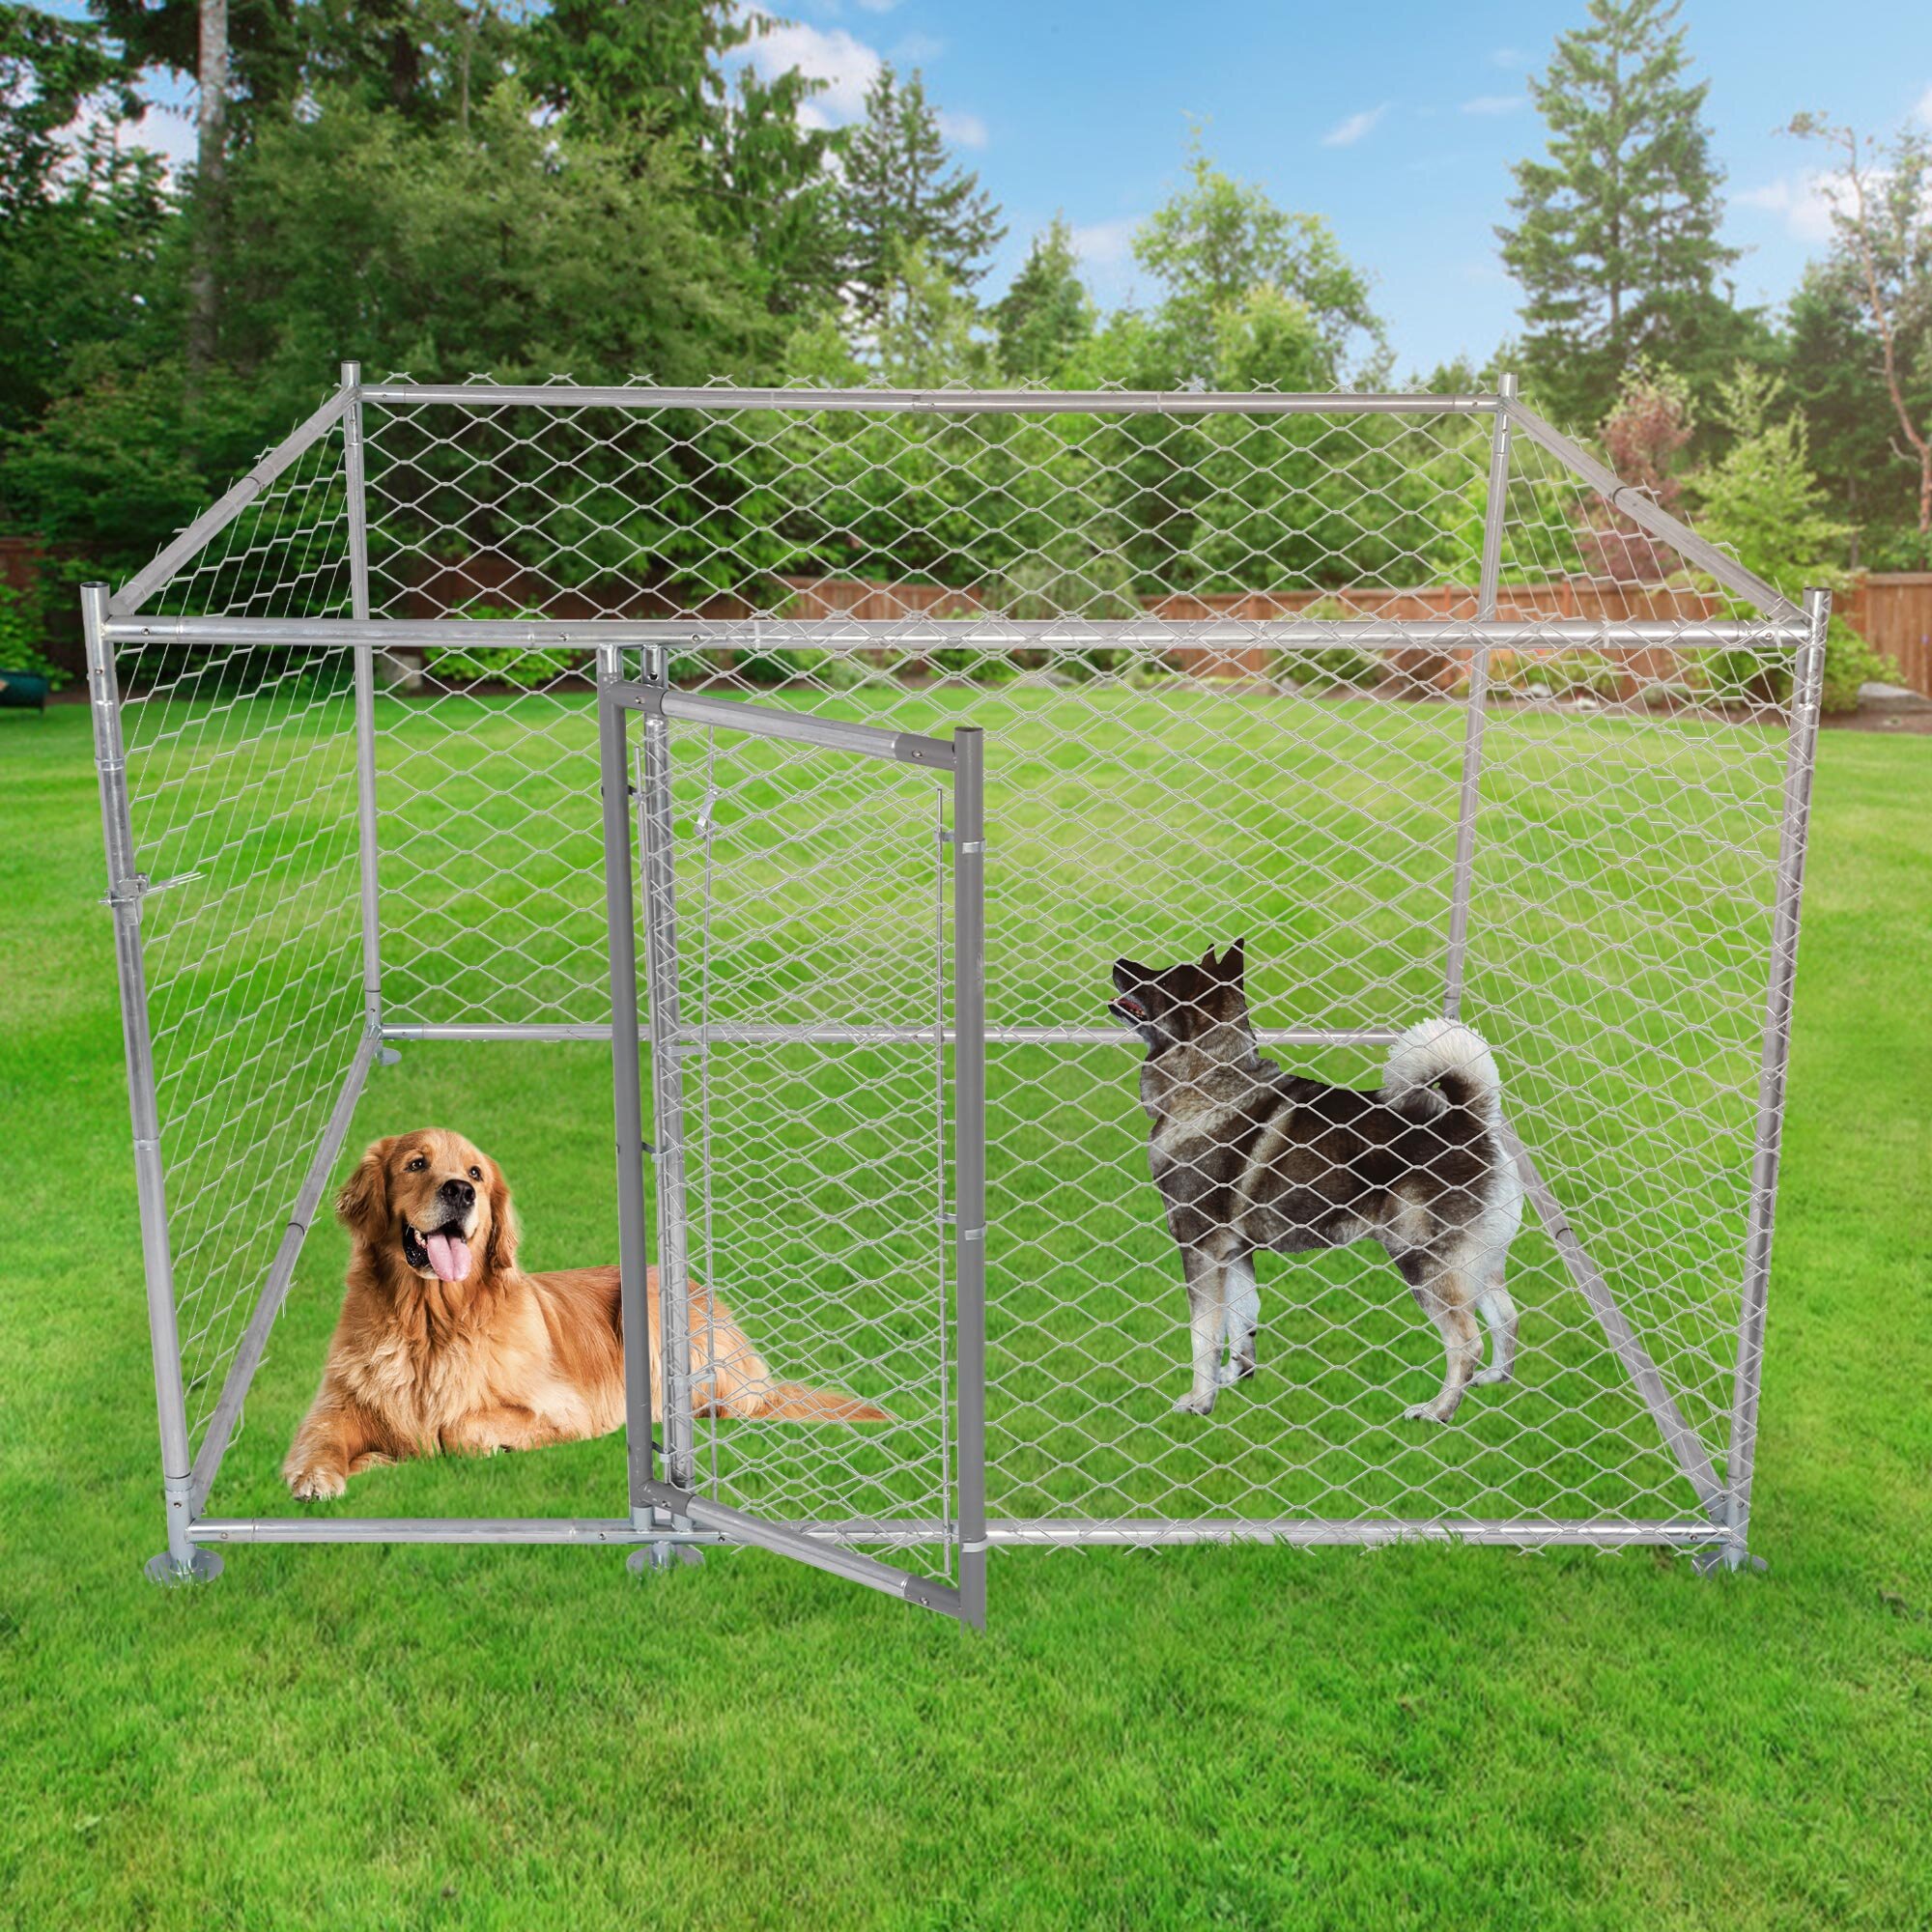 LUCKYREMORE Metal Dog Kennel Outdoor Large Dog, To Clean & Rust-Resistance Dog Crate With Lockable Gate | Wayfair